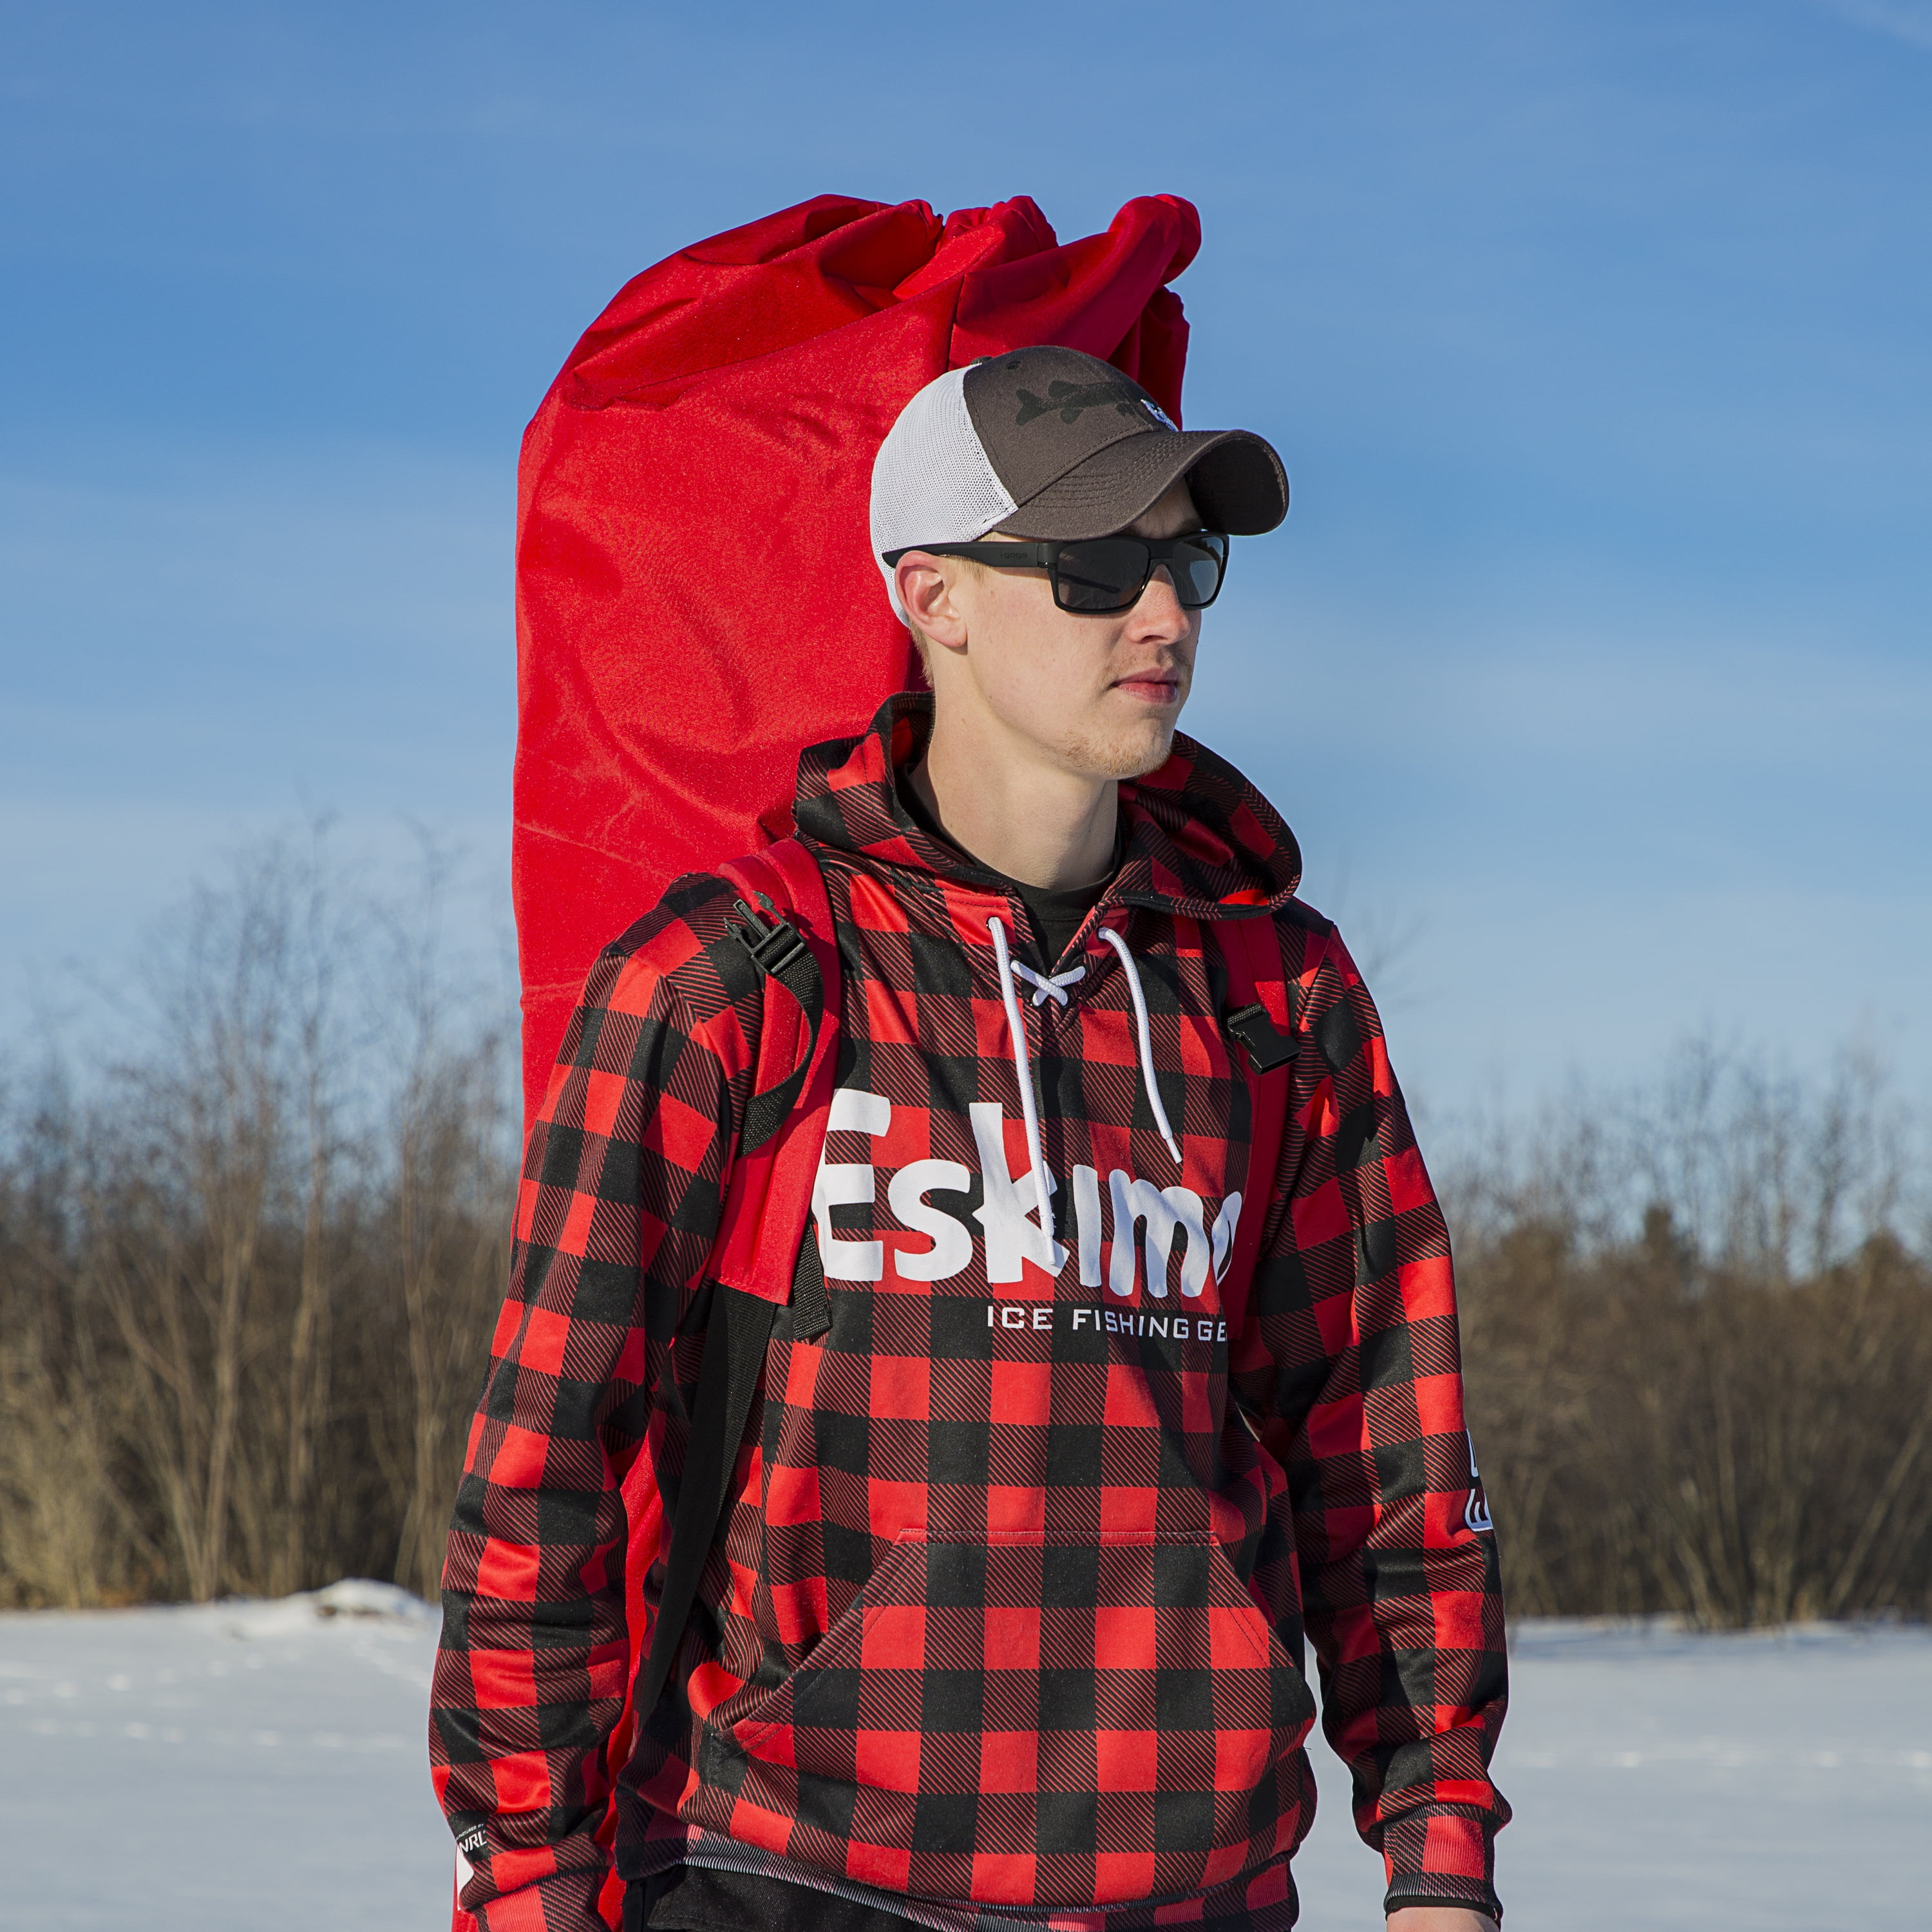 Eskimo 36150 QuickFish 6i Pop-Up Portable Insulated Ice Fishing Shelter, 6  Person 